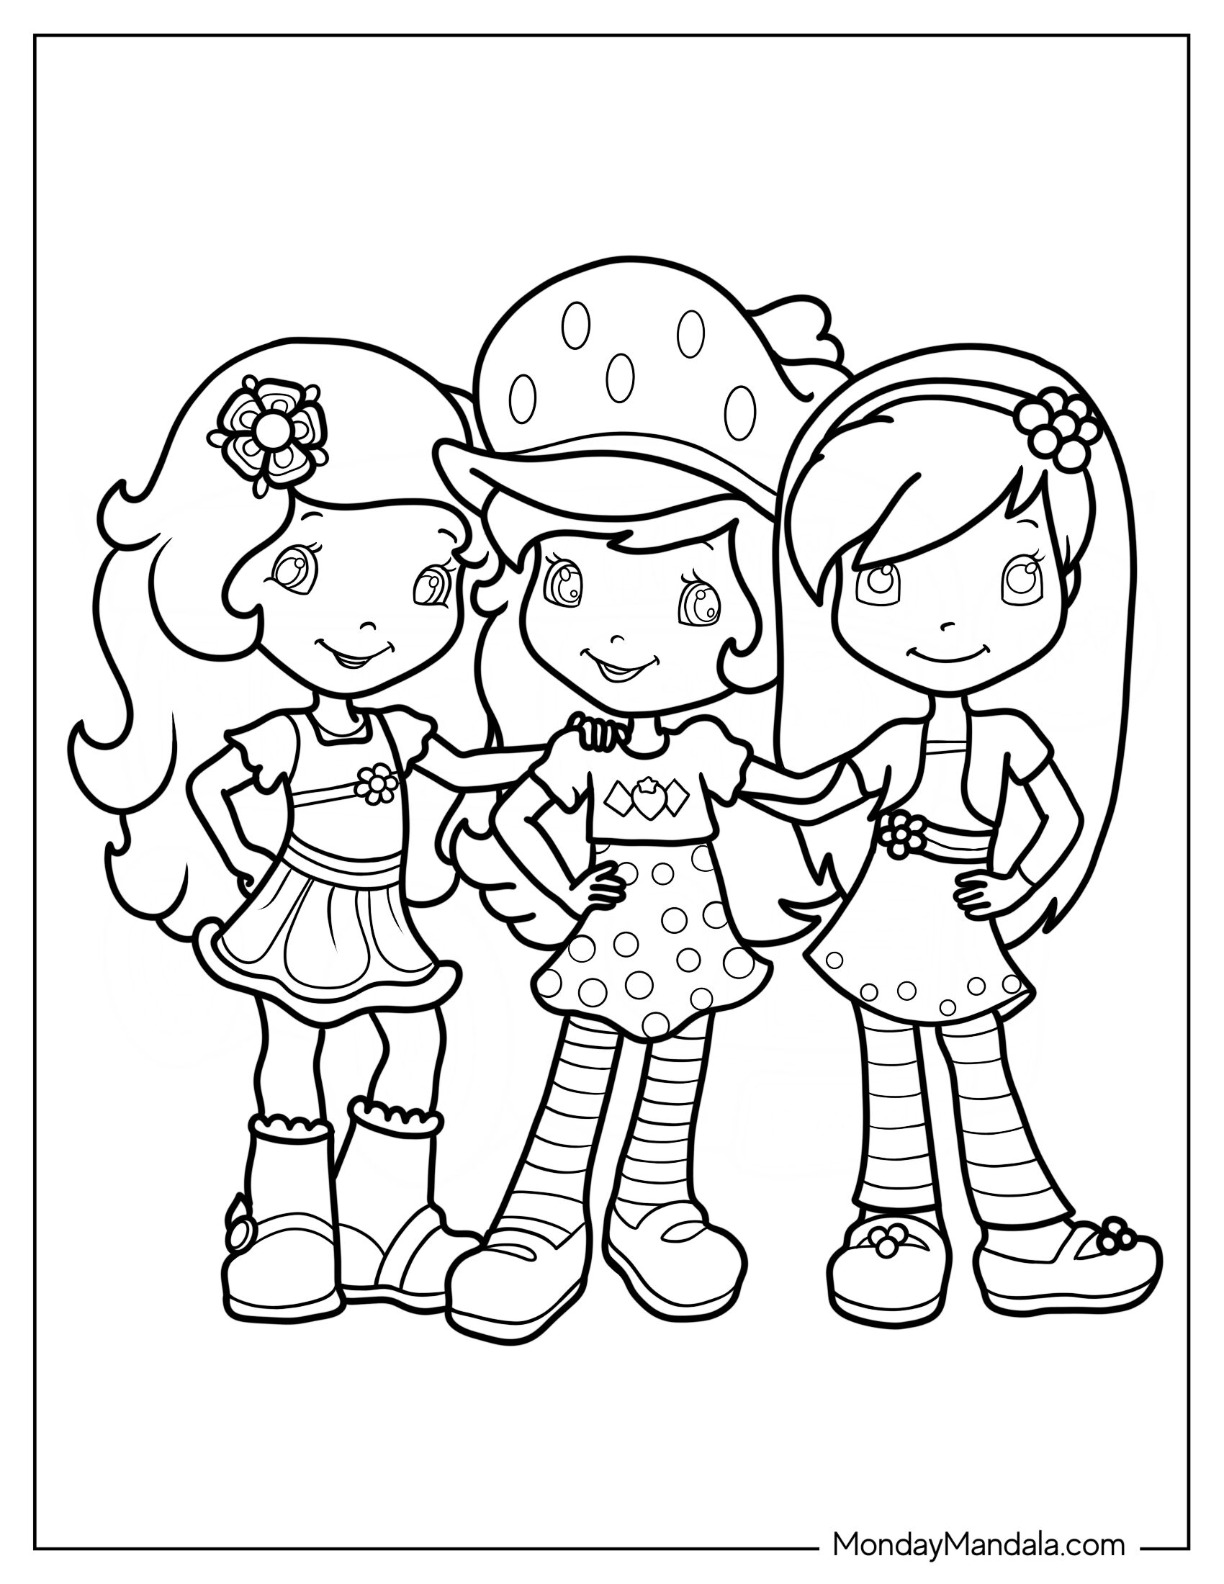 Strawberry shortcake coloring pages free pdf printables